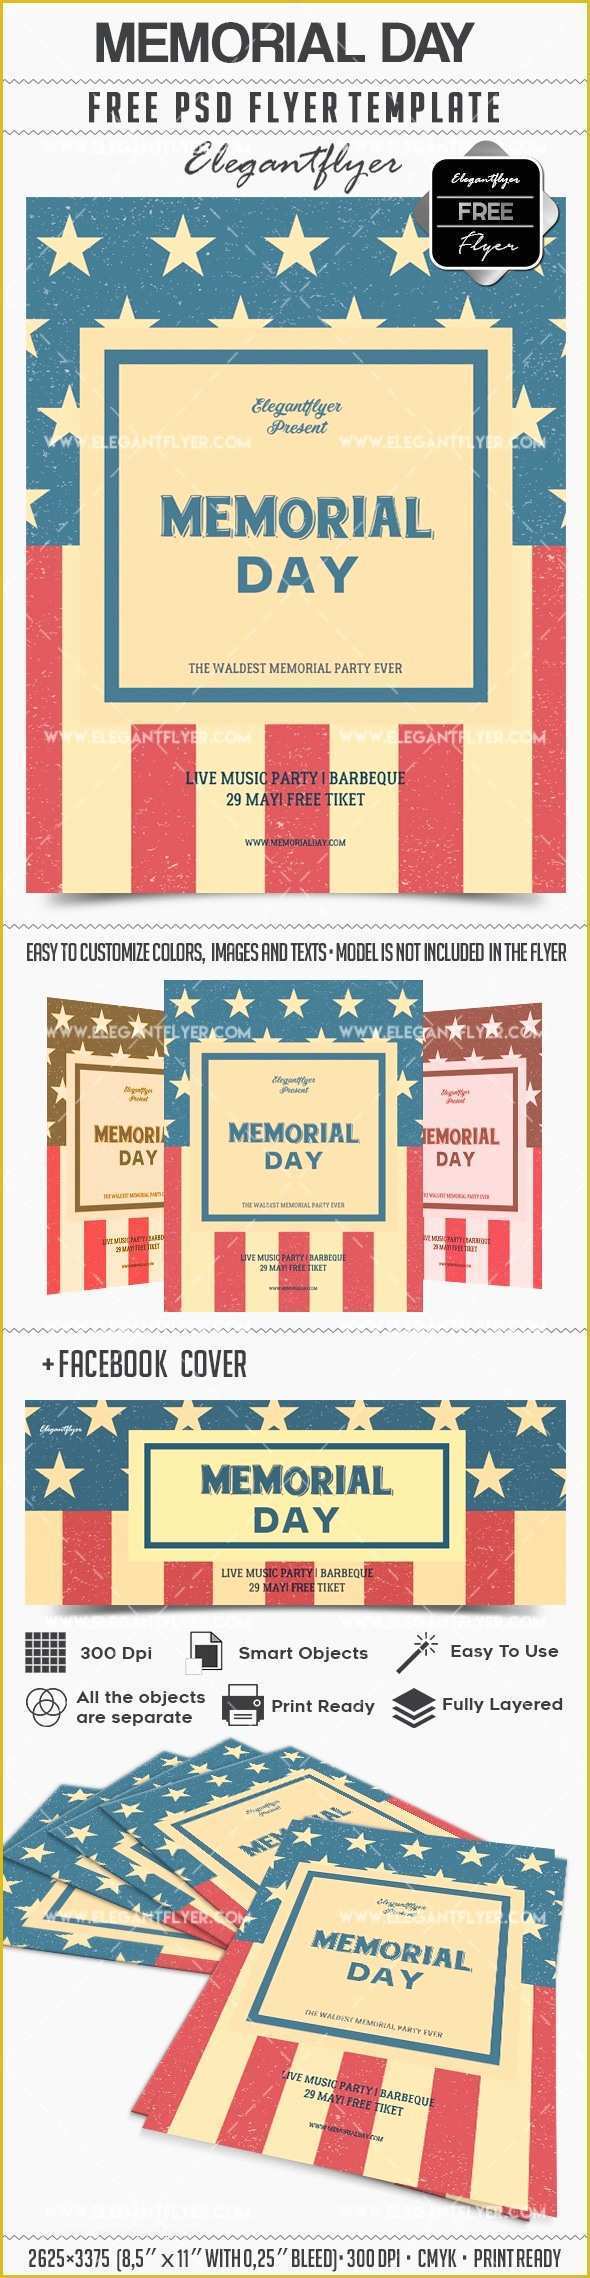 Free Funeral Flyer Template Psd Of Memorial Day – Free Flyer Psd Template – by Elegantflyer